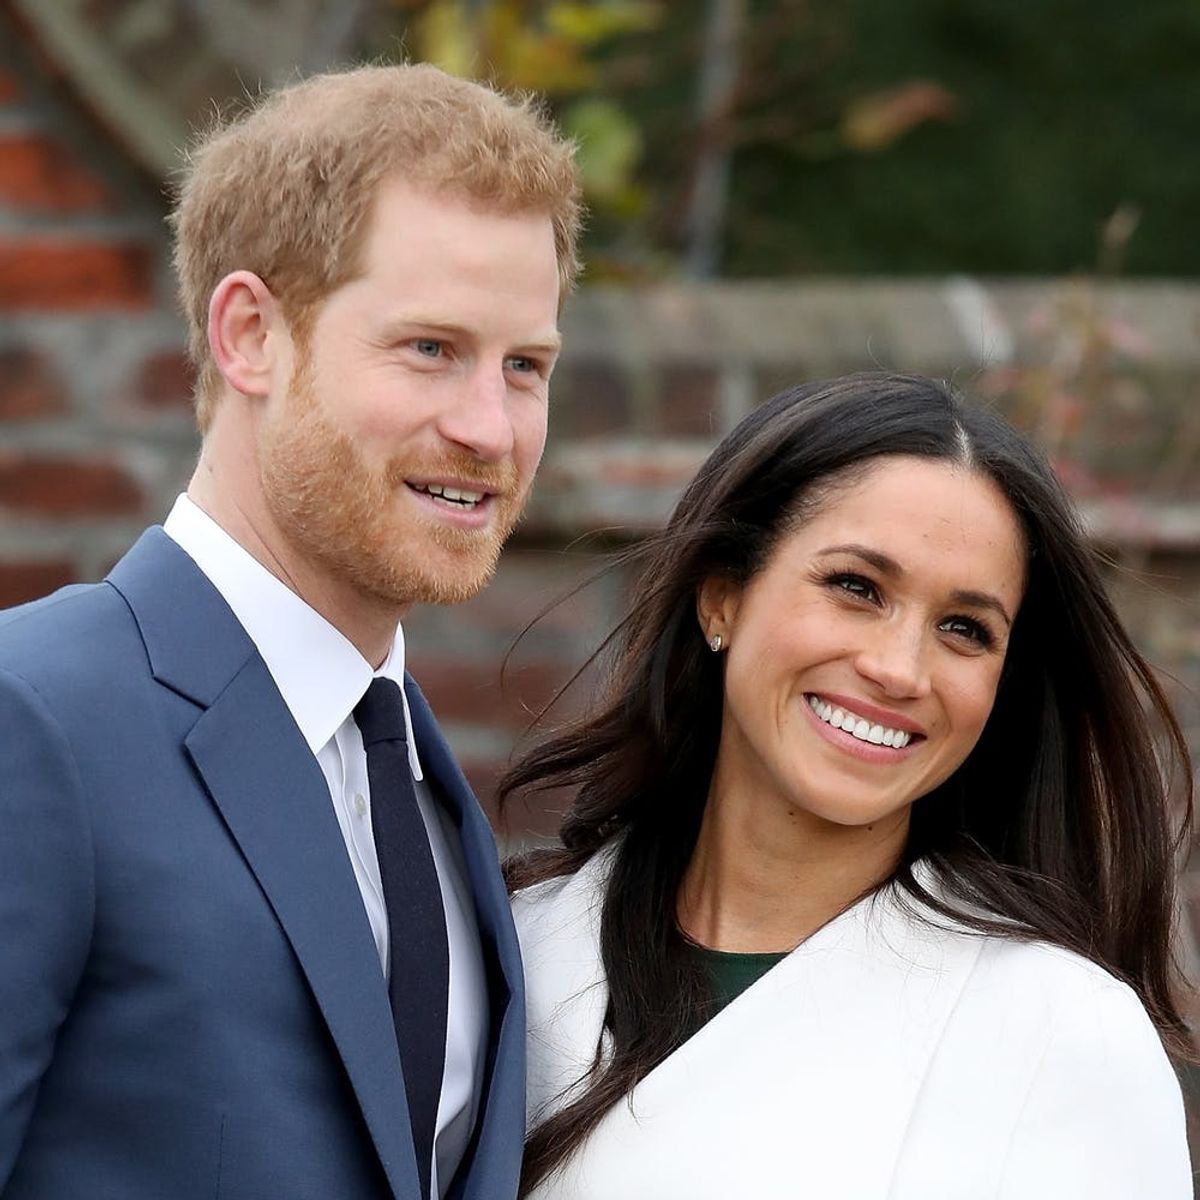 3 Major Moments to Watch for at the Royal Wedding